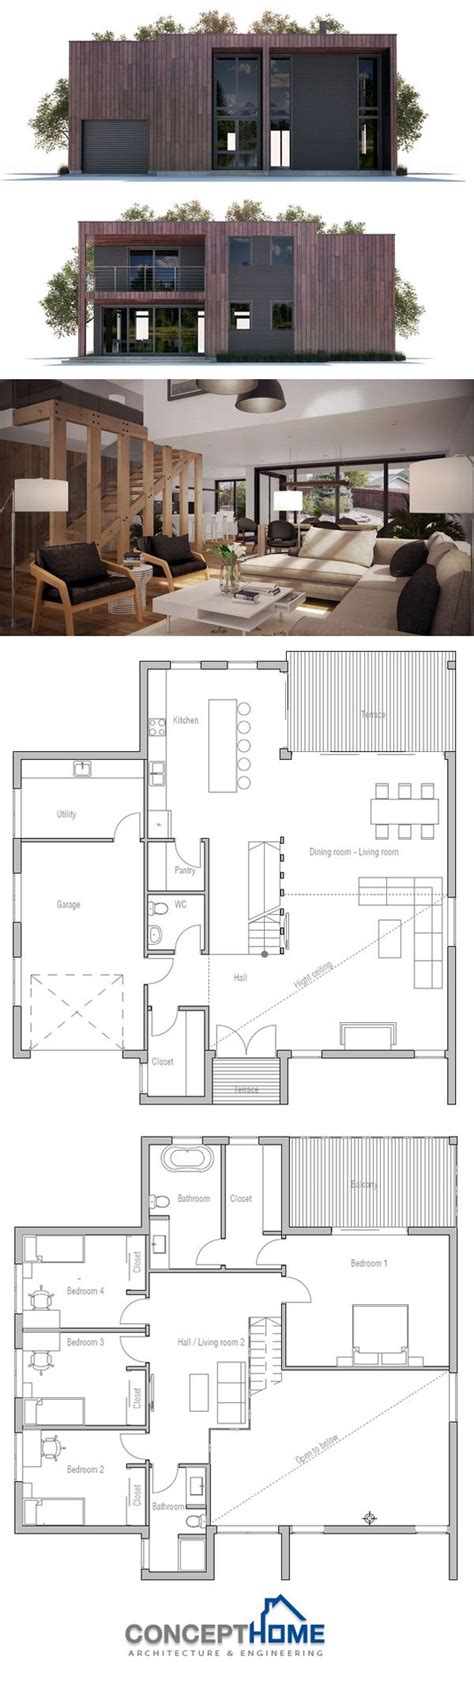 images  house plans contemporary modern houses  pinterest house design small